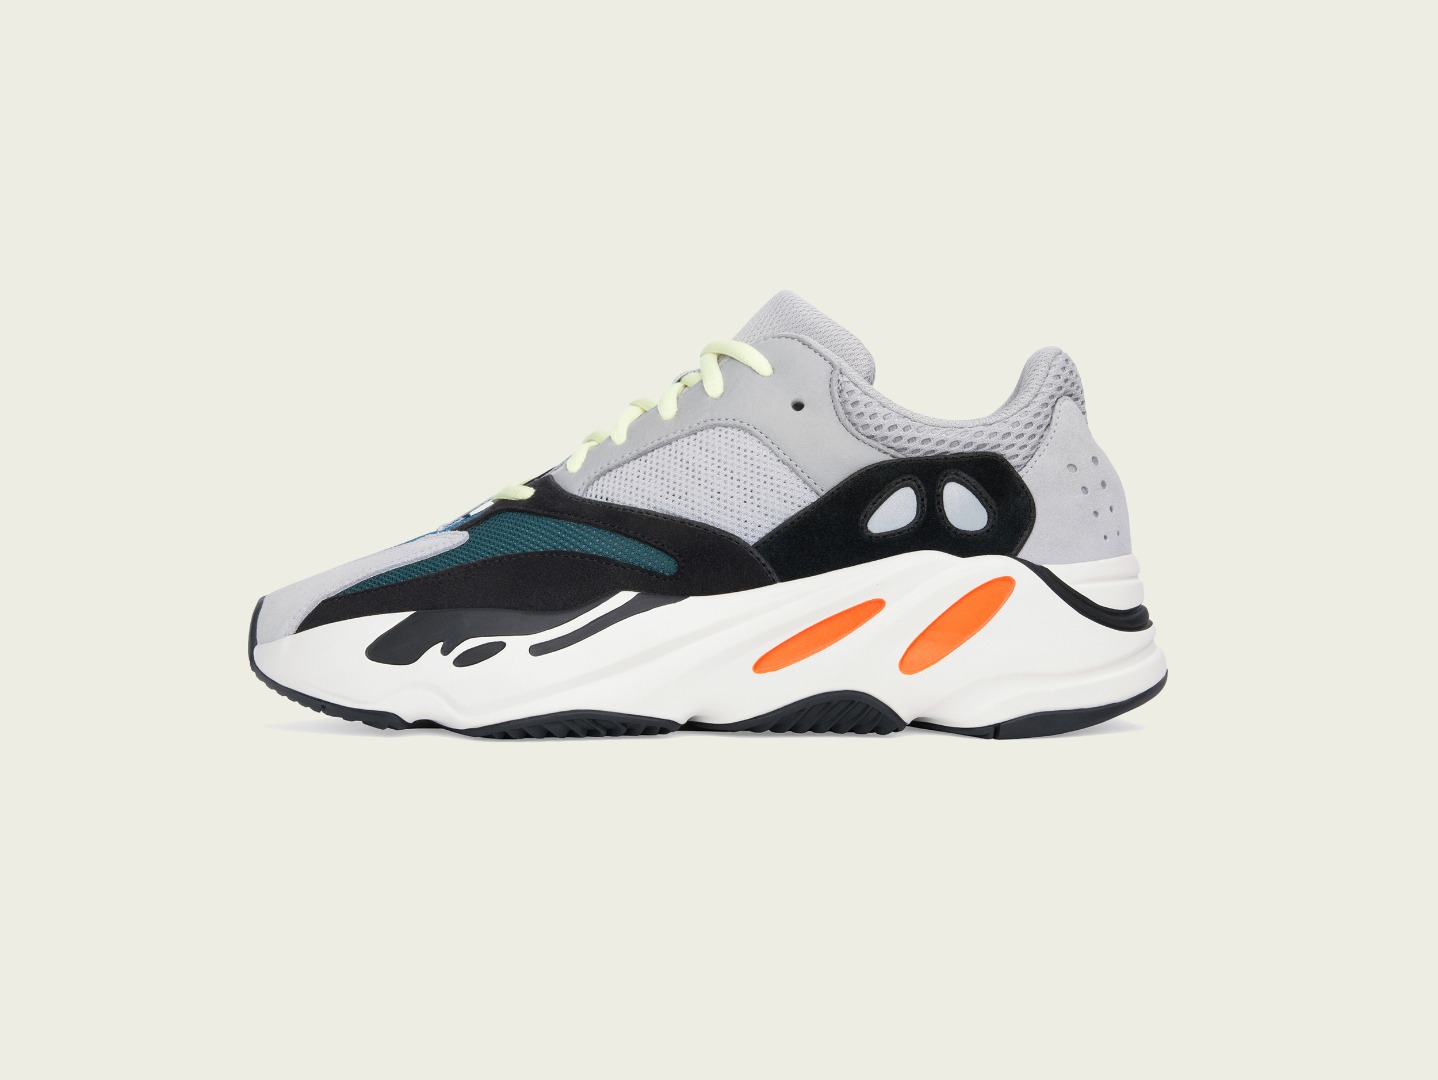 YEEZY BOOST 700 MGH SOLID GREY/CHALK WHITE/CORE BLACK